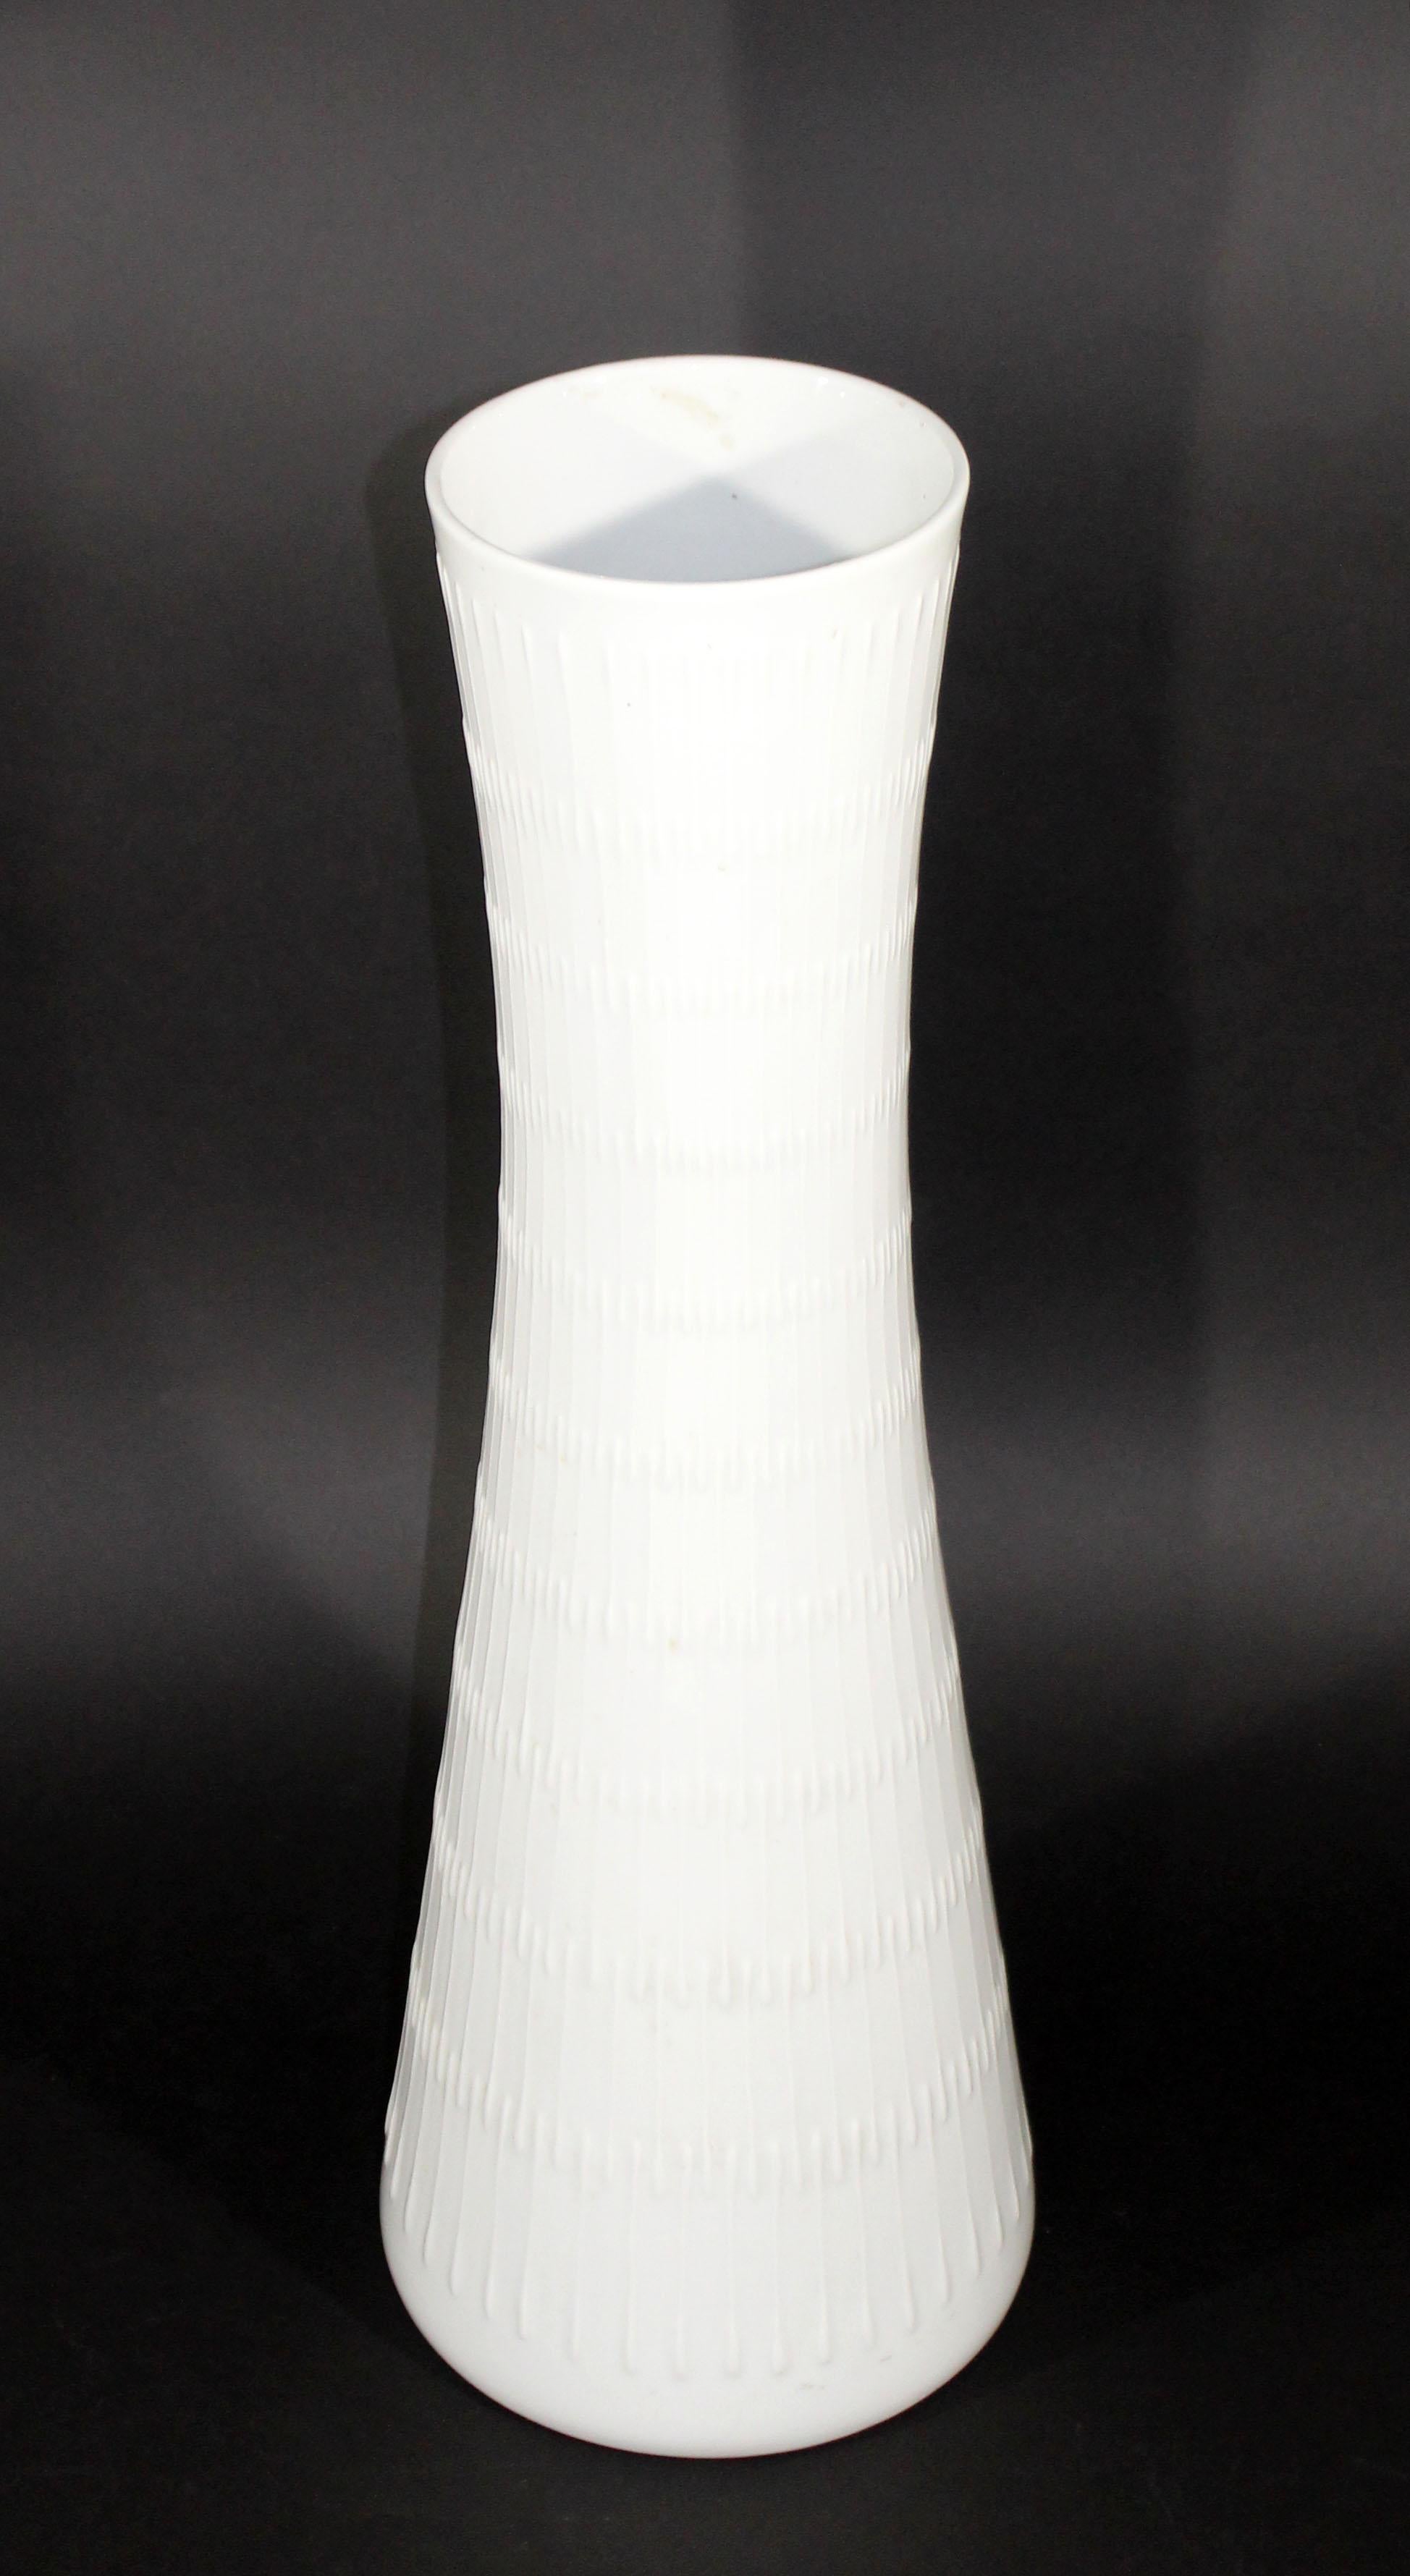 For your consideration is an incredible, white porcelain, tall vase, made in Germany, by Hutschenreuther, circa the 1970s. In excellent condition. The dimensions are 9.5